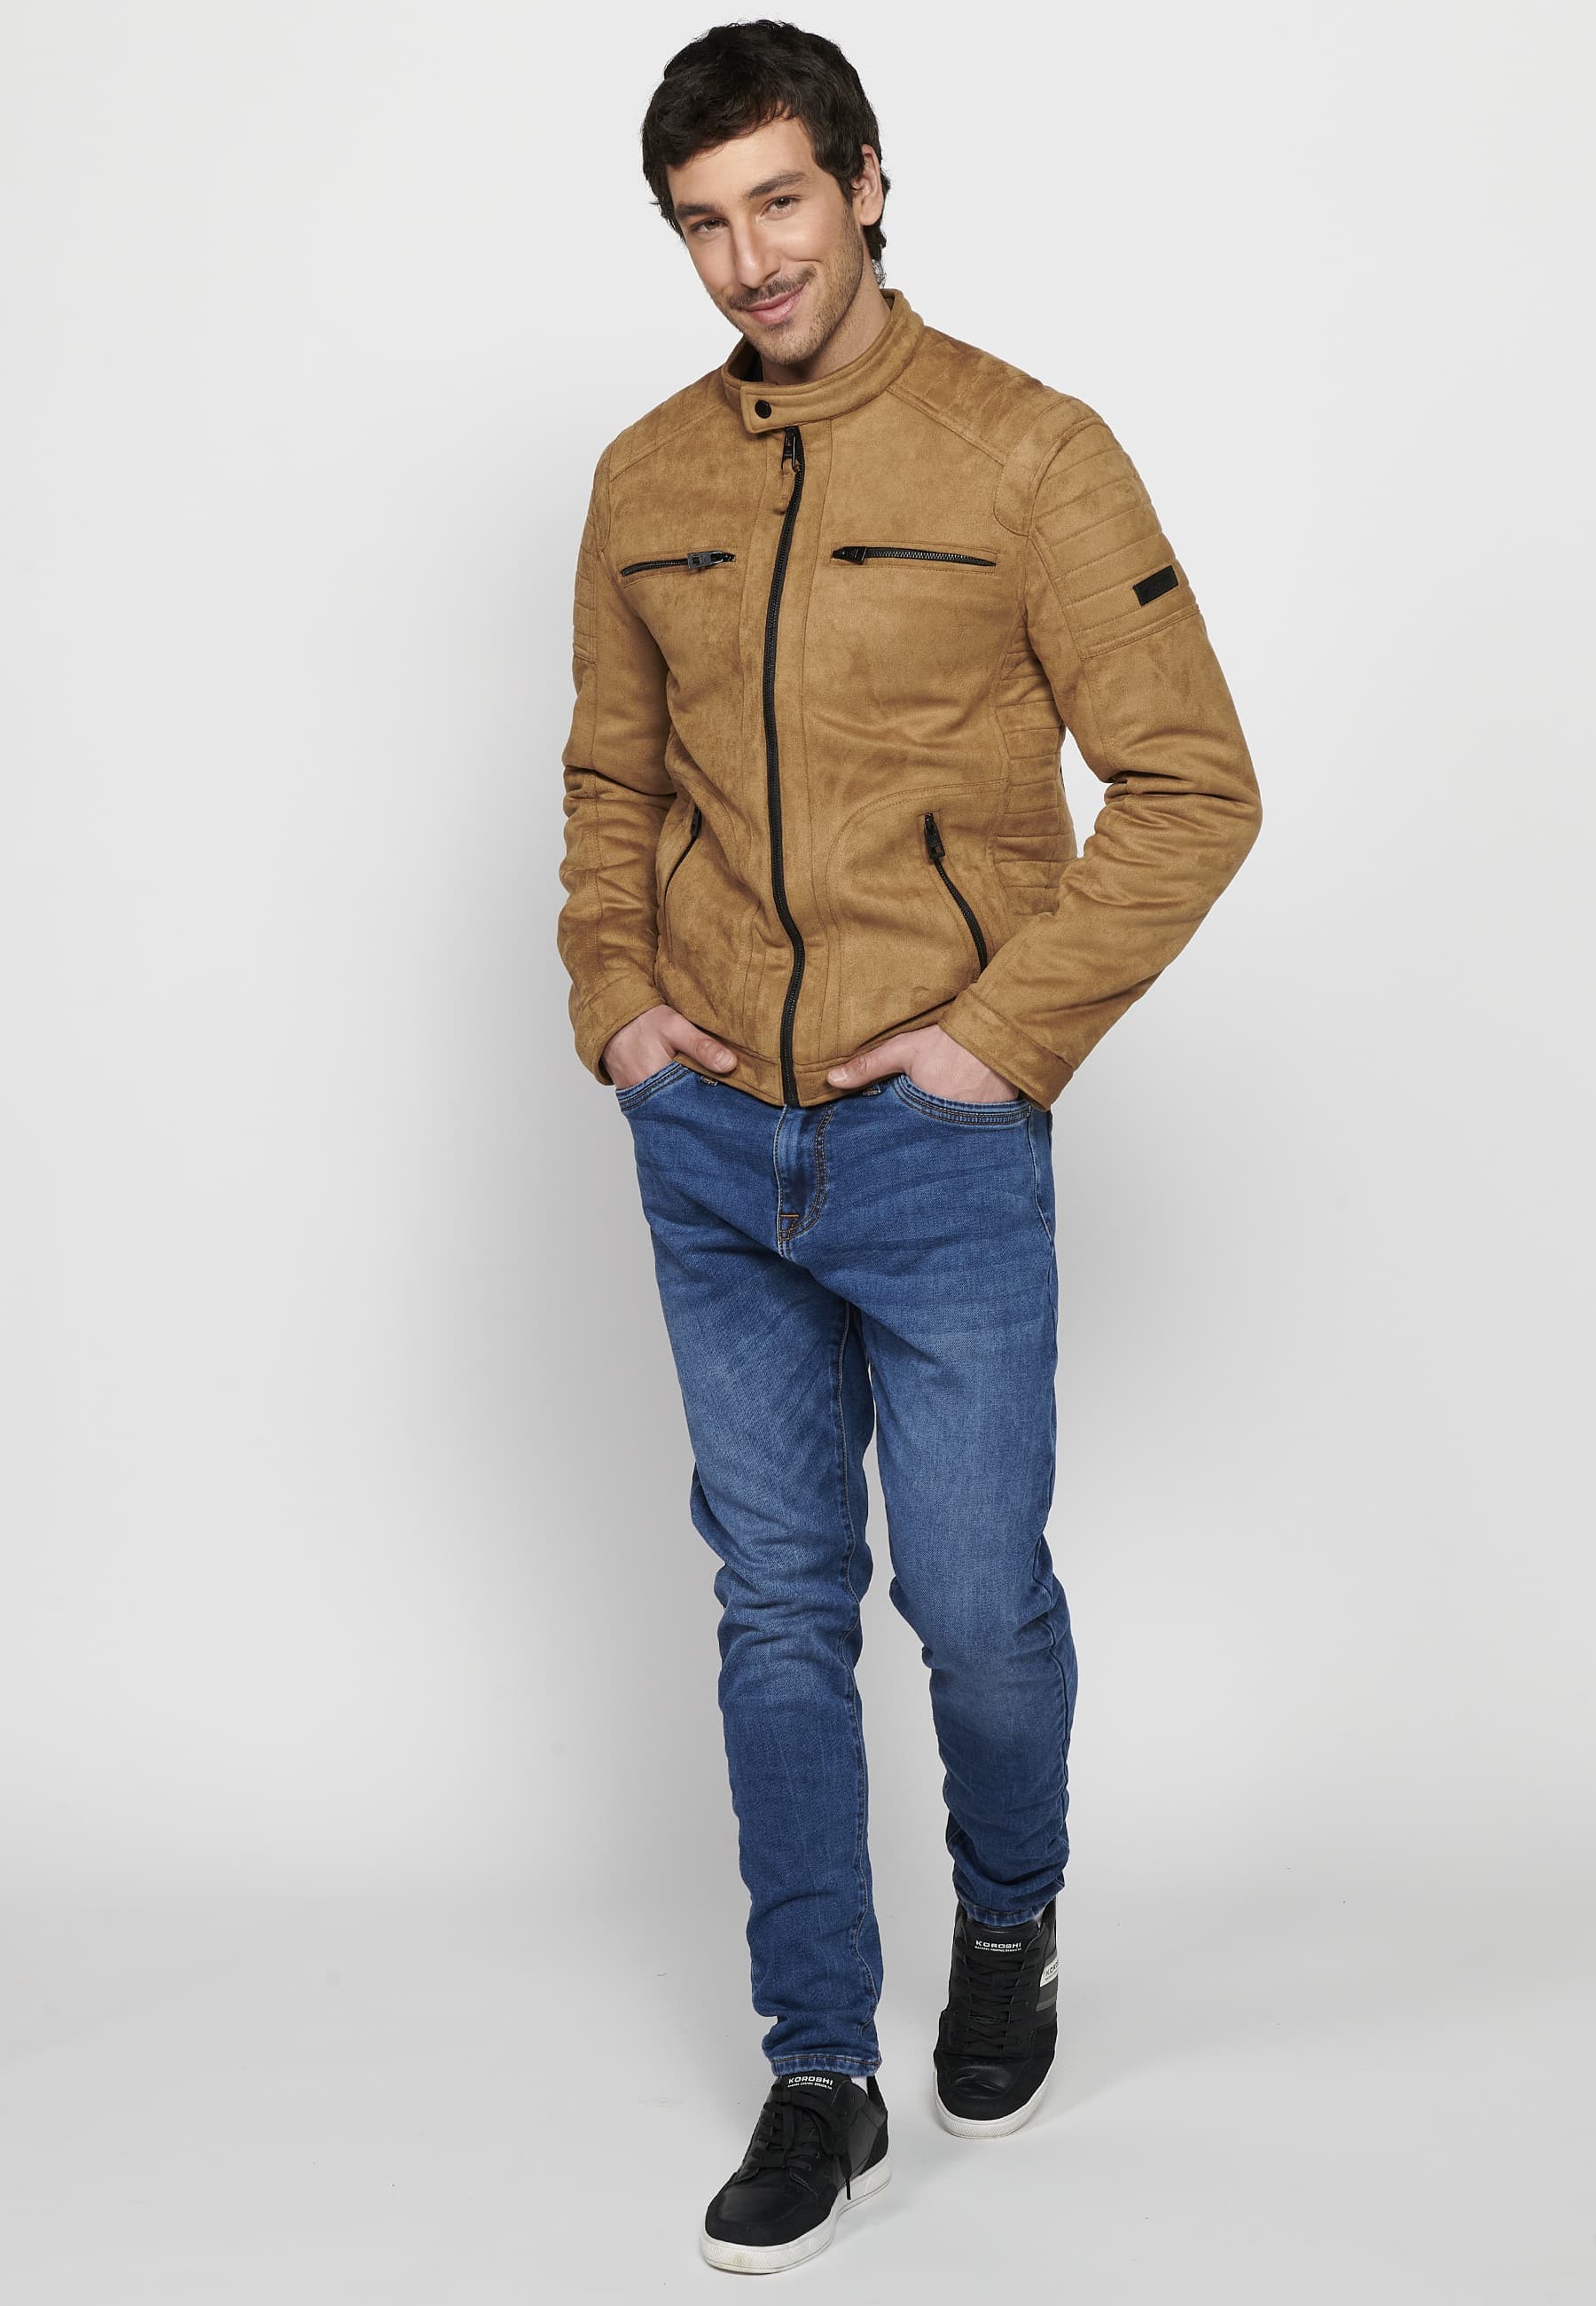 Men's Long Sleeve Jacket with Round Neck and Zipper Front Closure with Four Pockets in Tan Color 2